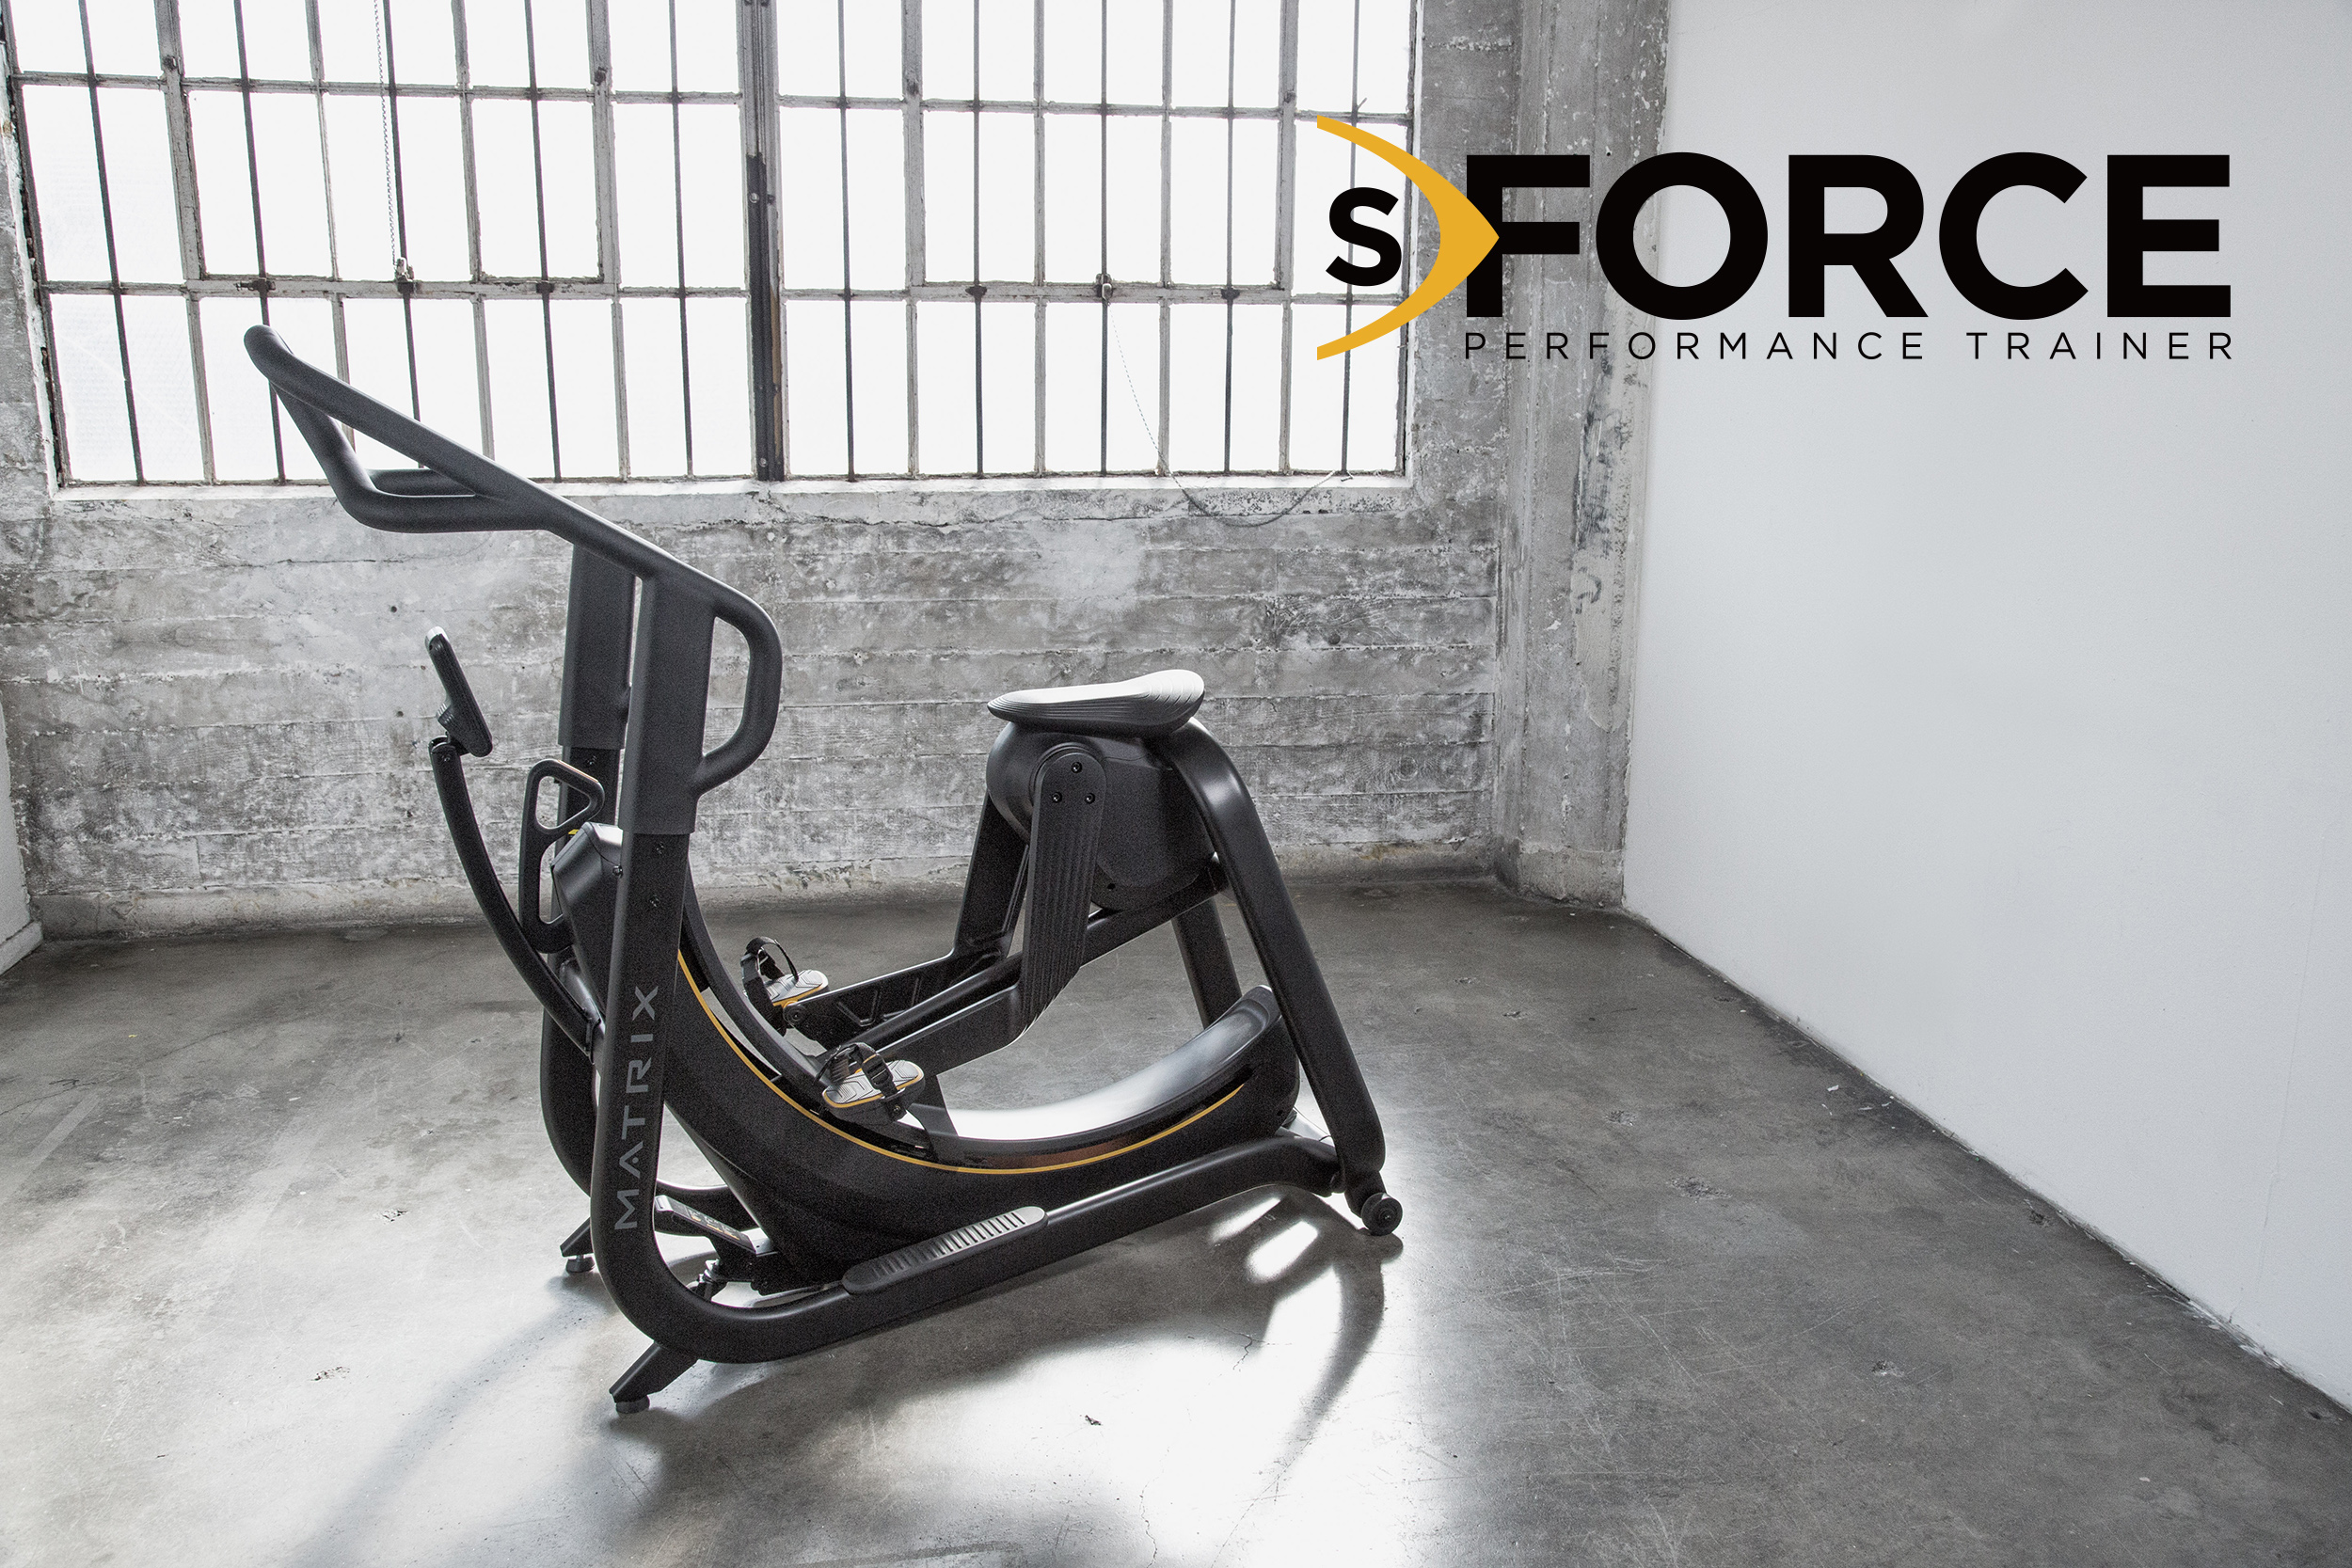 S-force_performance_trainer